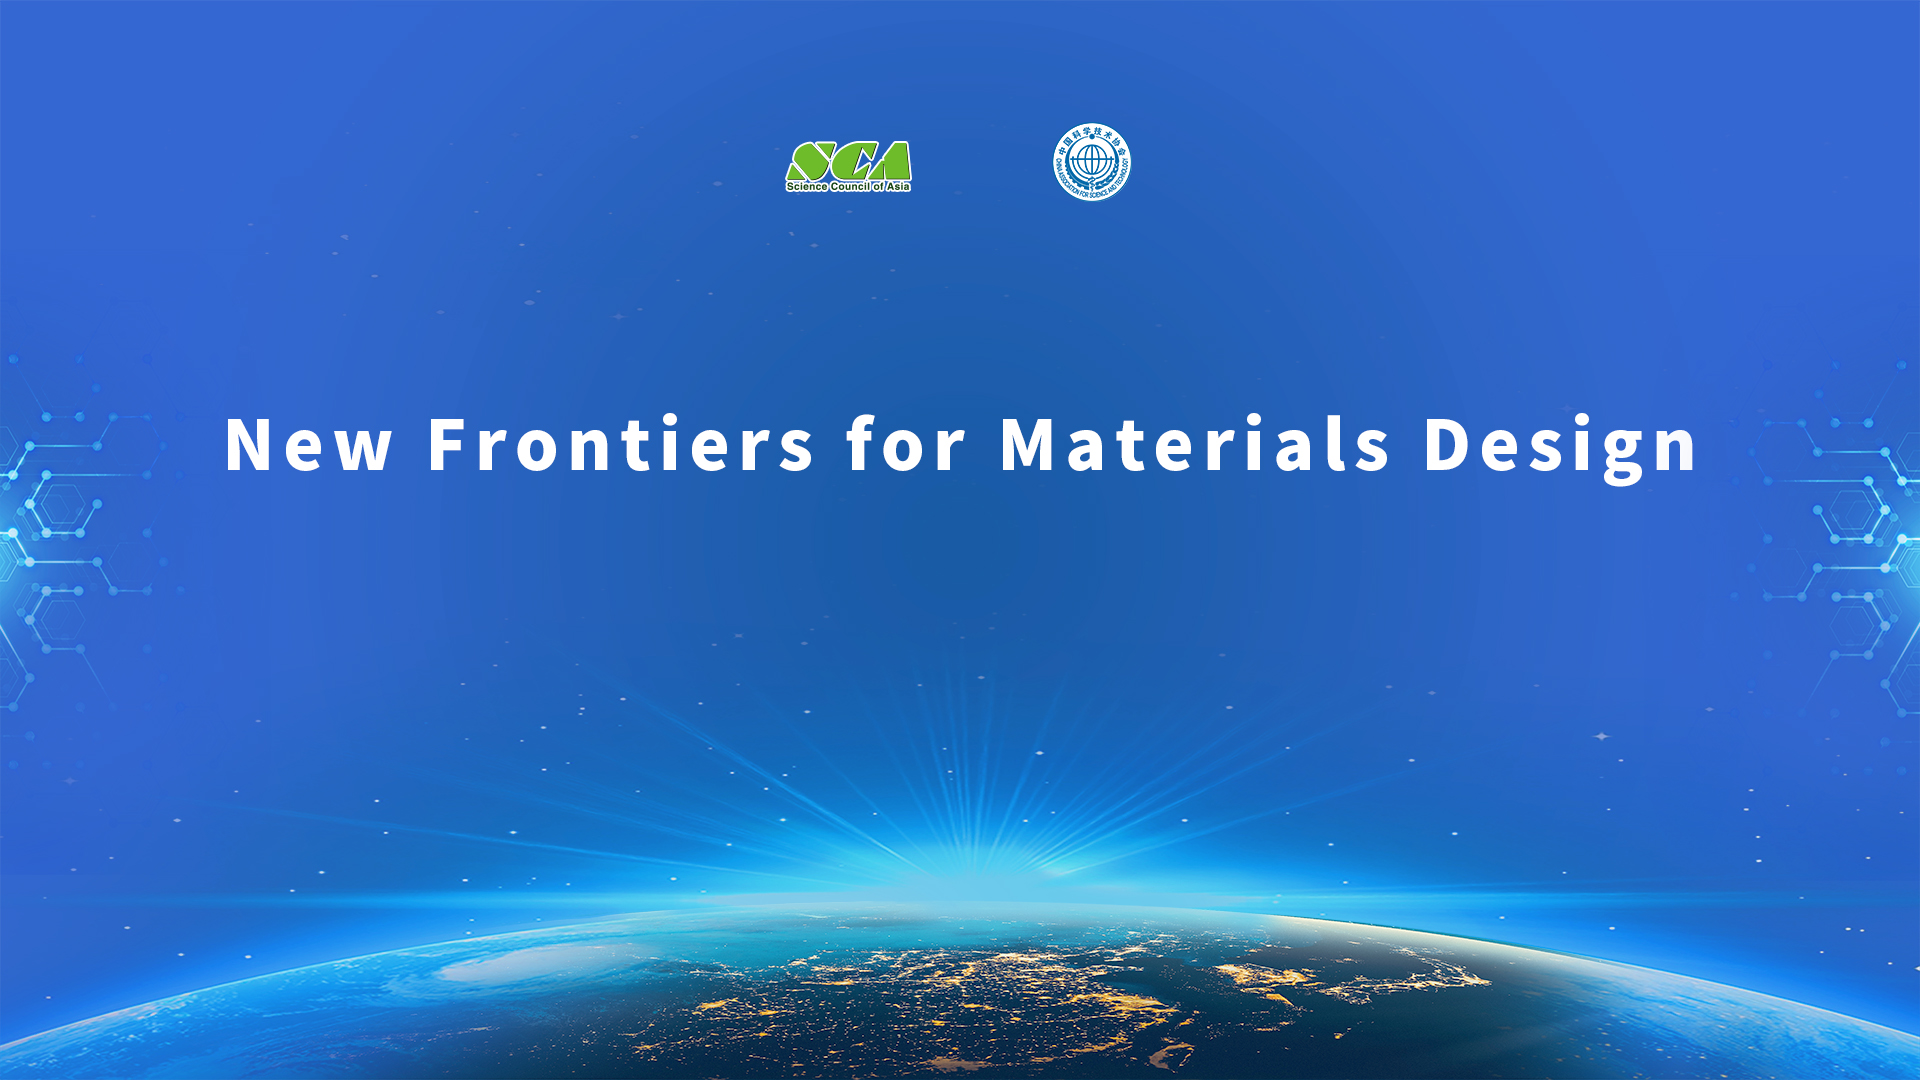 Session 5: New Frontiers for Materials Design